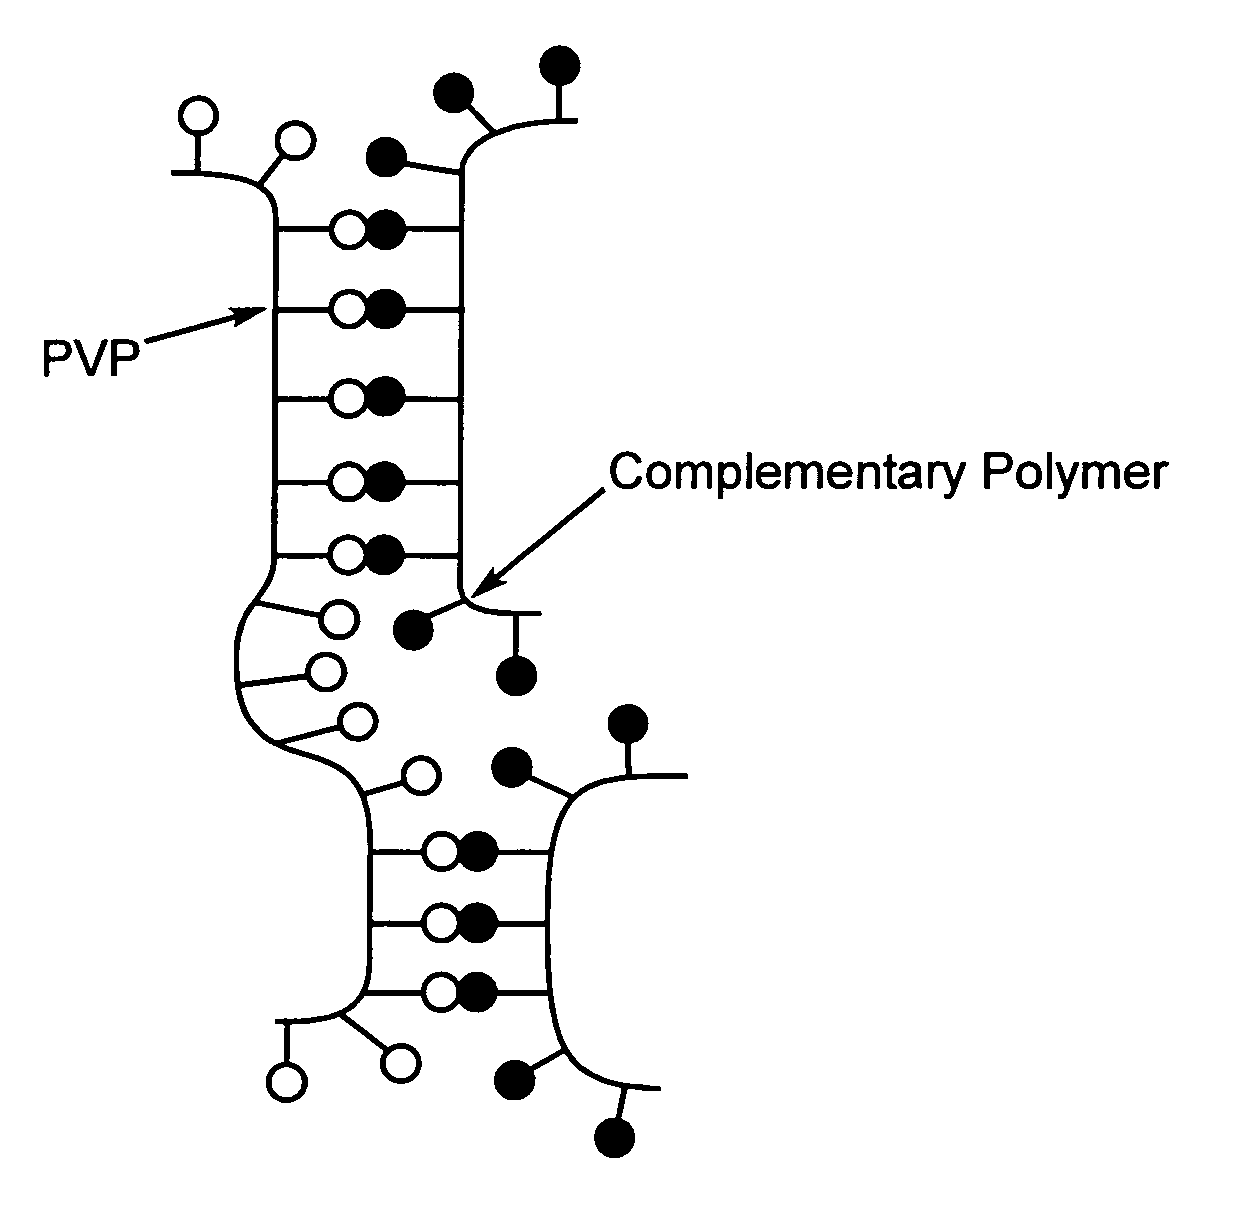 Method of preparing polymeric adhesive compositions utilizing the mechanism of interaction between the polymer components